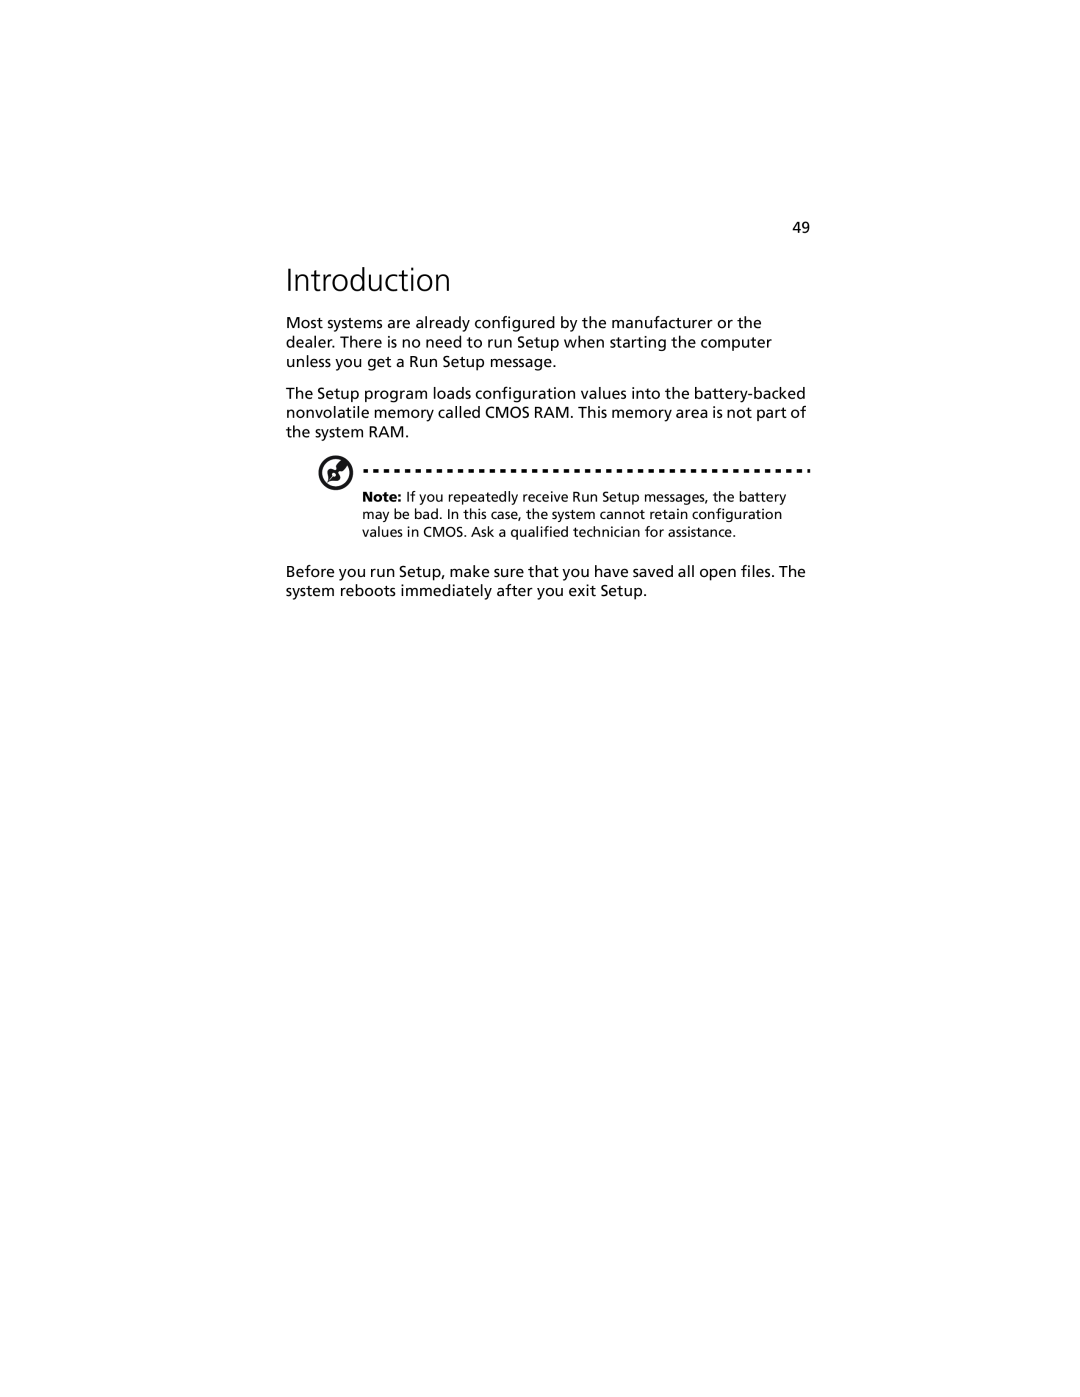 Acer G301 manual Introduction 